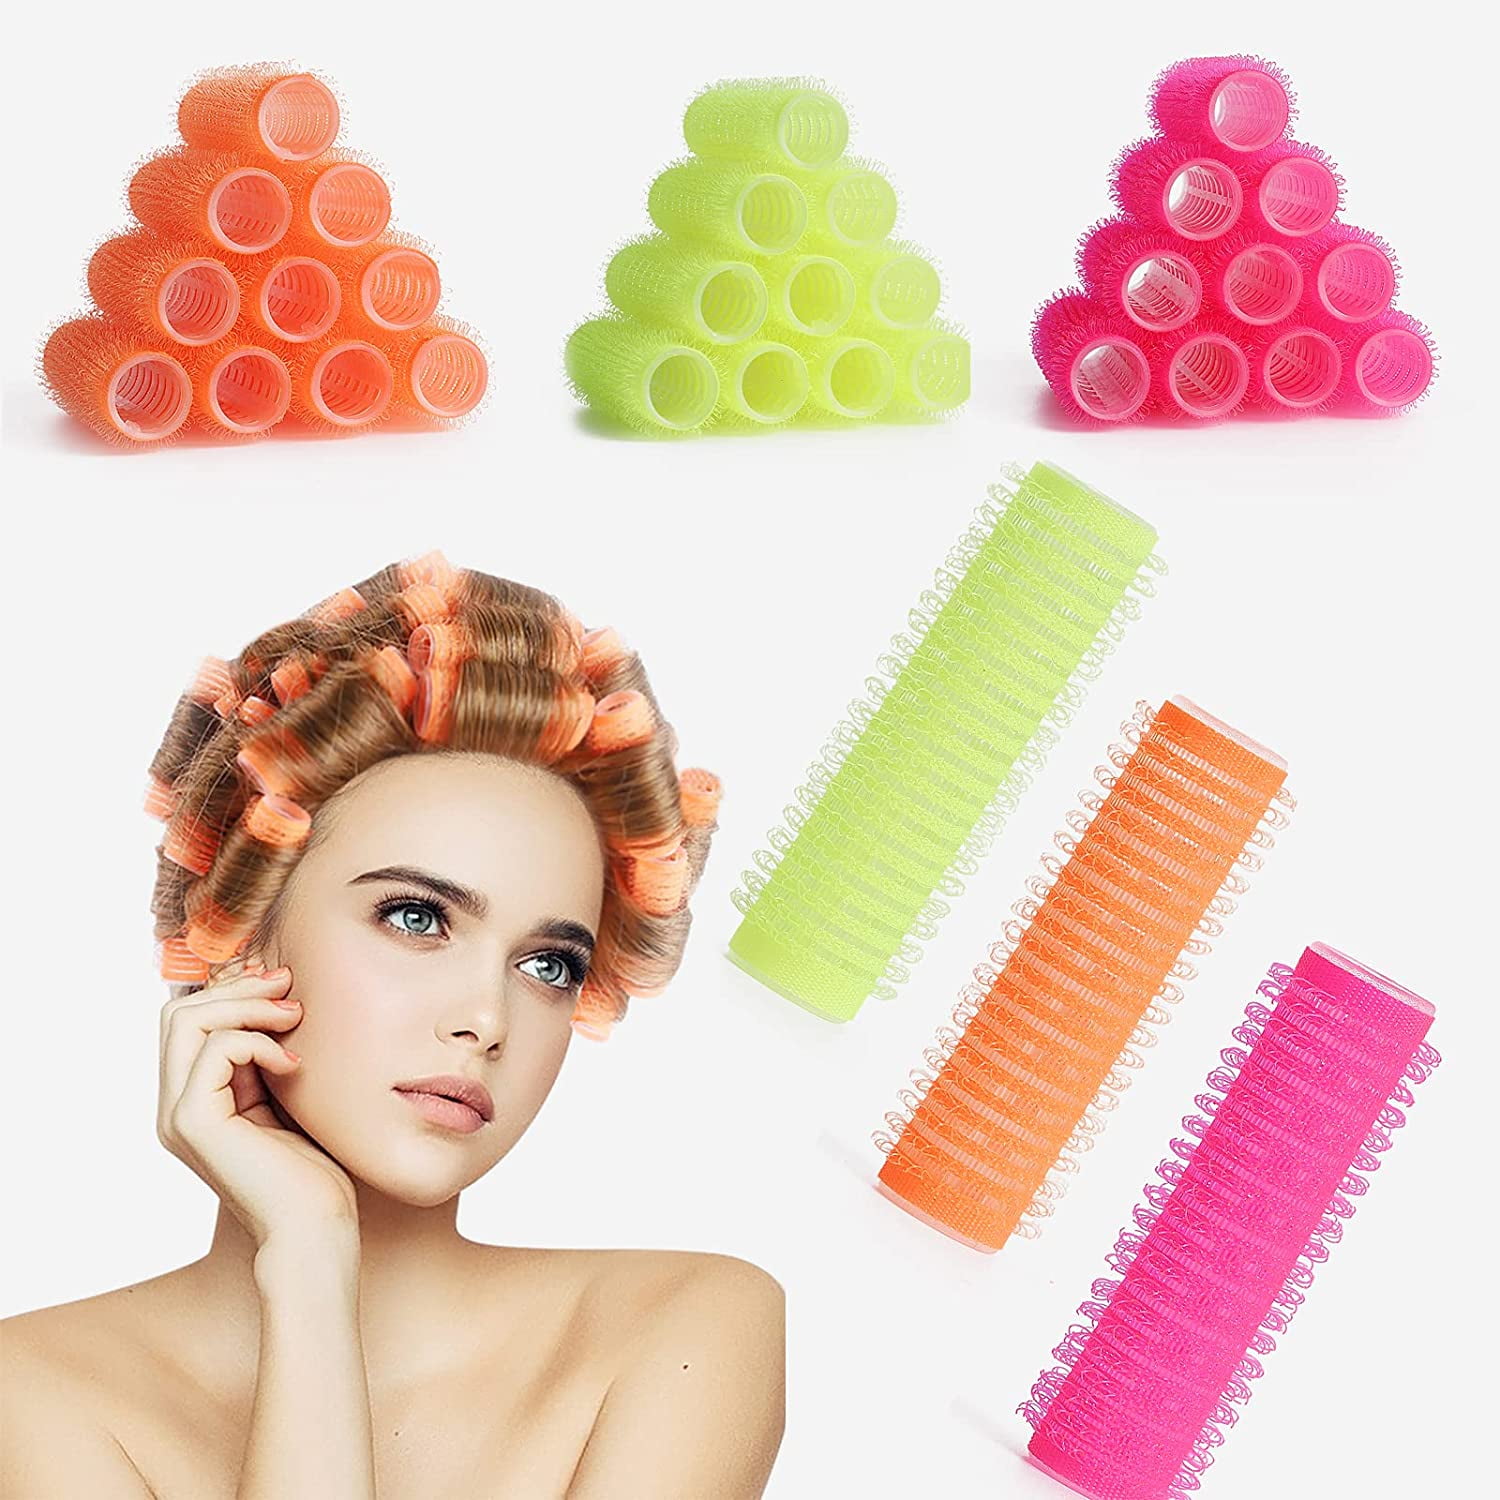 Wig Tools and Accessories, HD Wig Cap, Curlers Roller